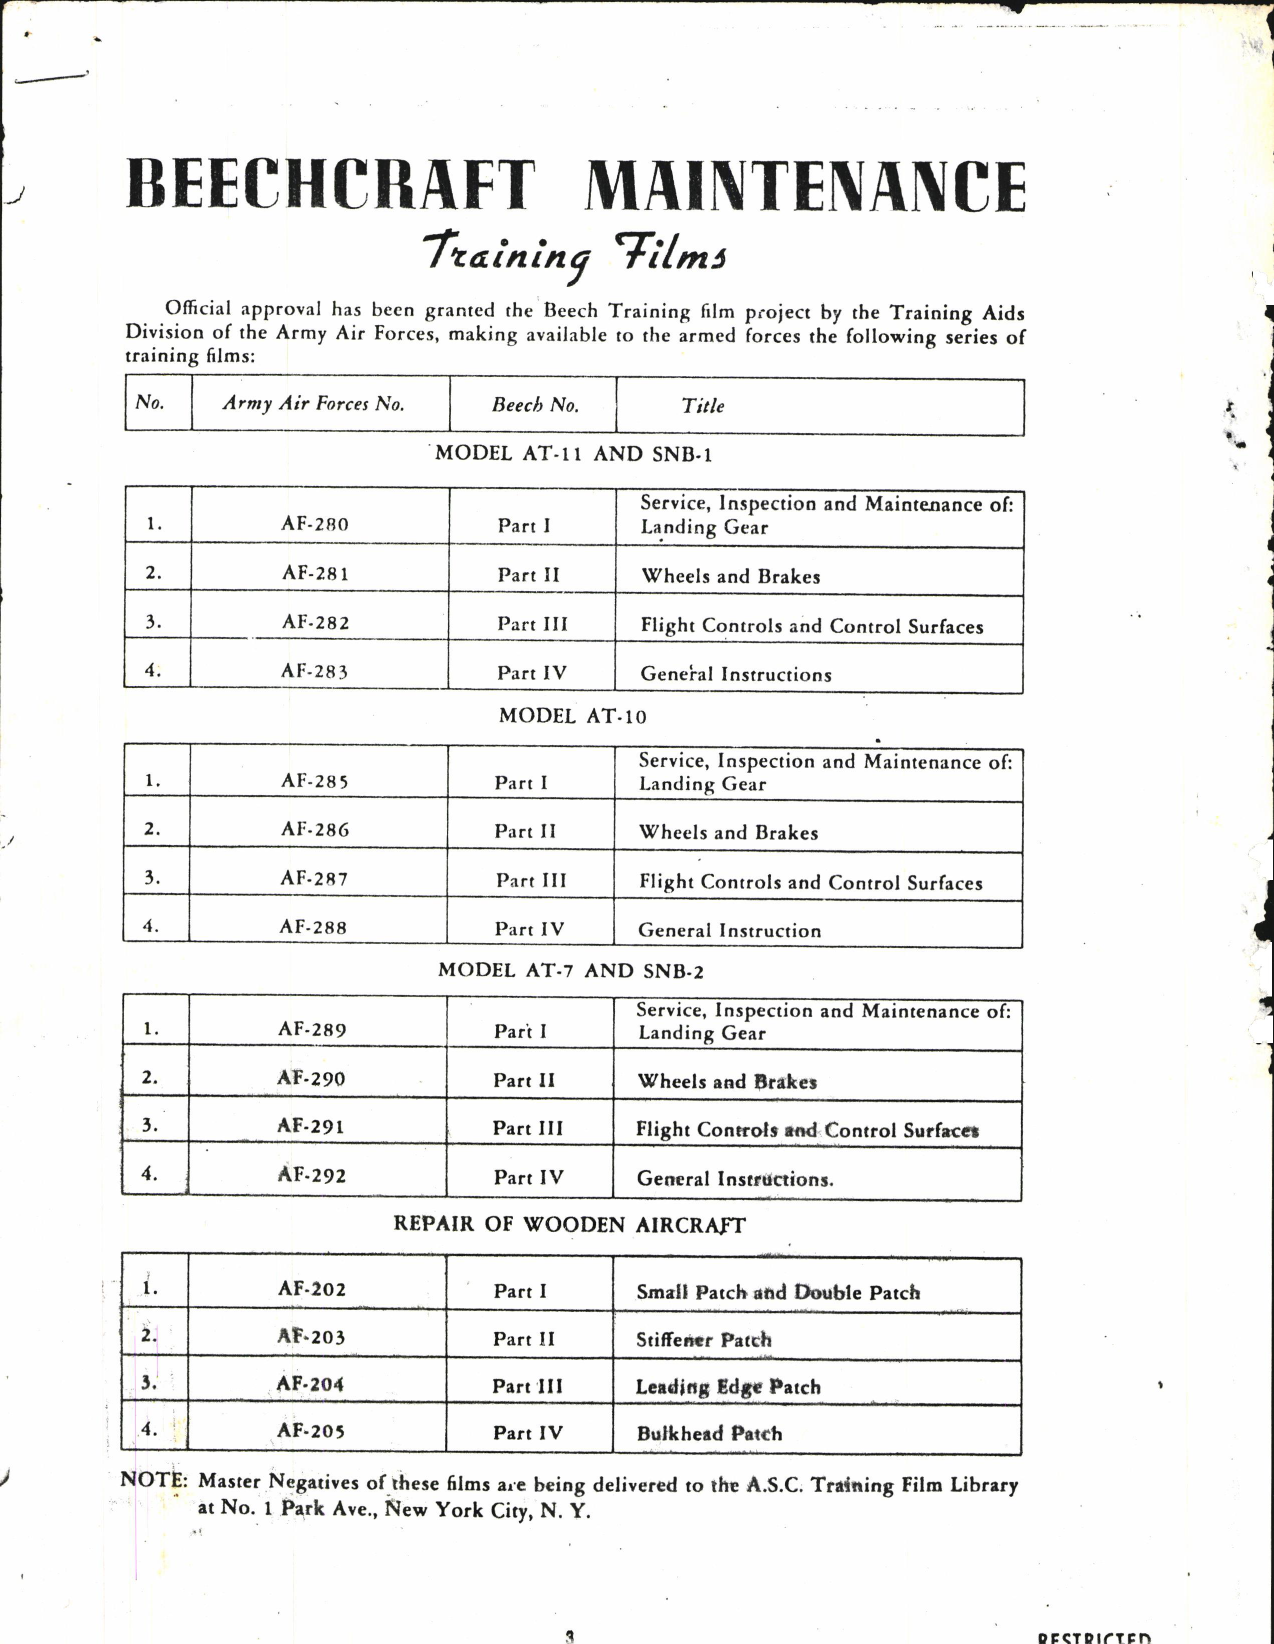 Sample page 1 from AirCorps Library document: Beechcraft Maintenance and Training Information